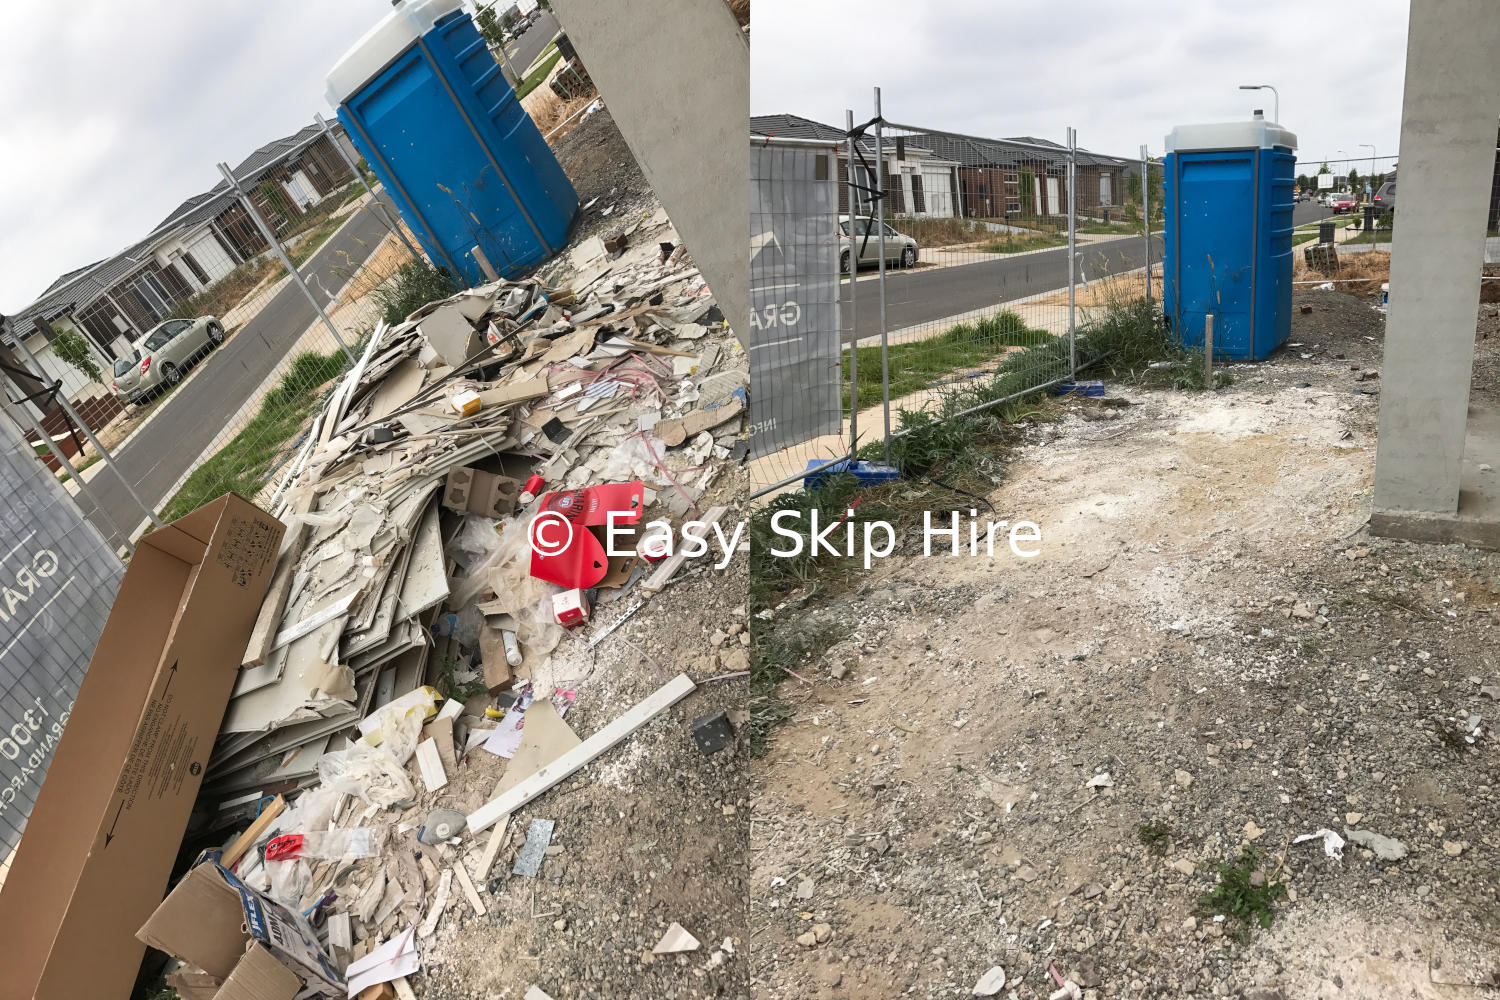 construction waste removal in melbourne - before and after